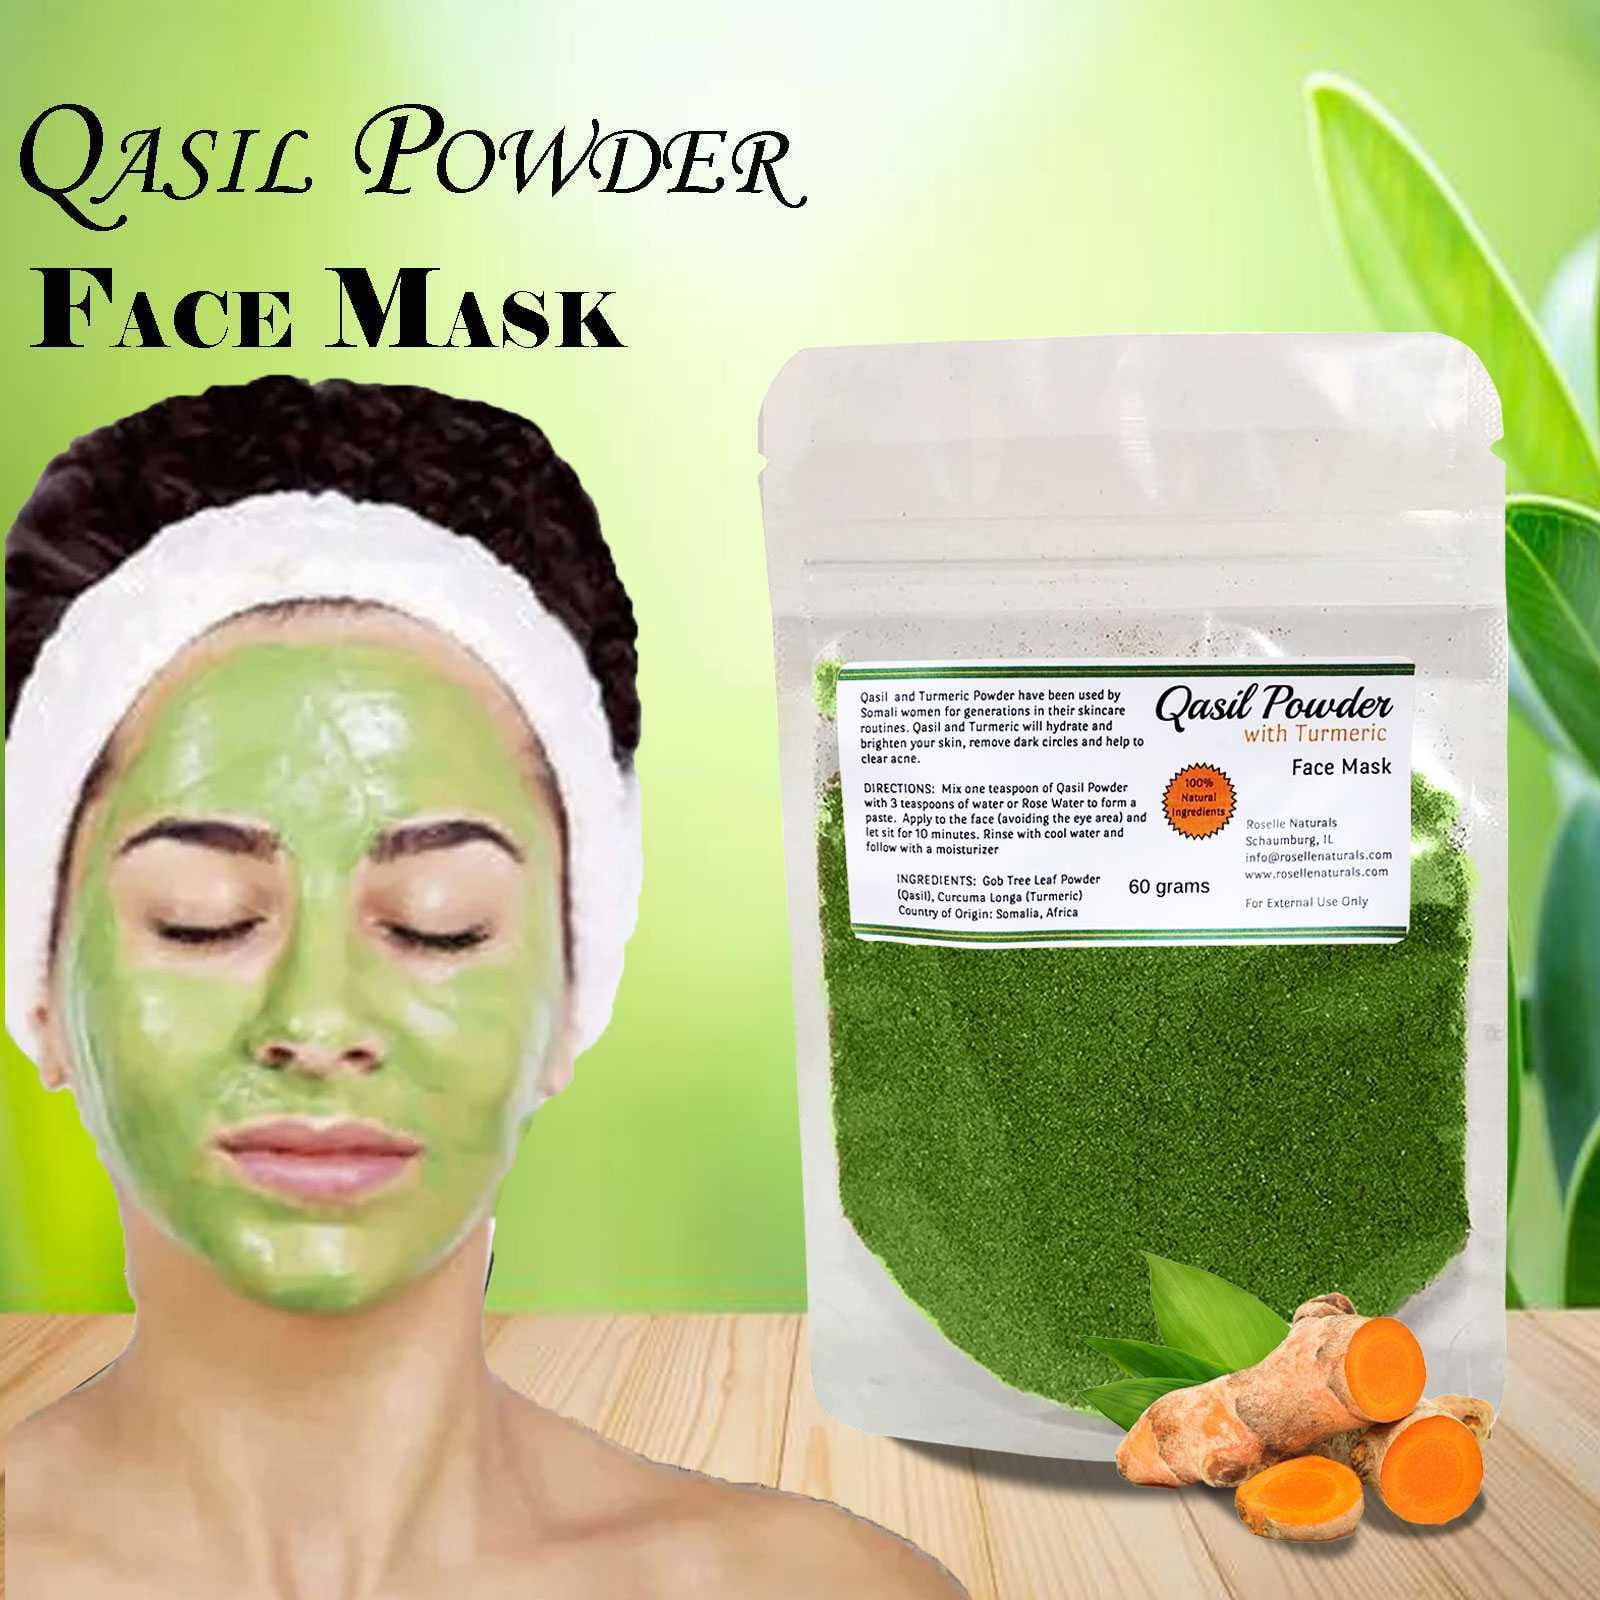 Qasil Powder Ancient African Remedy Natural Skin Care -  Sweden